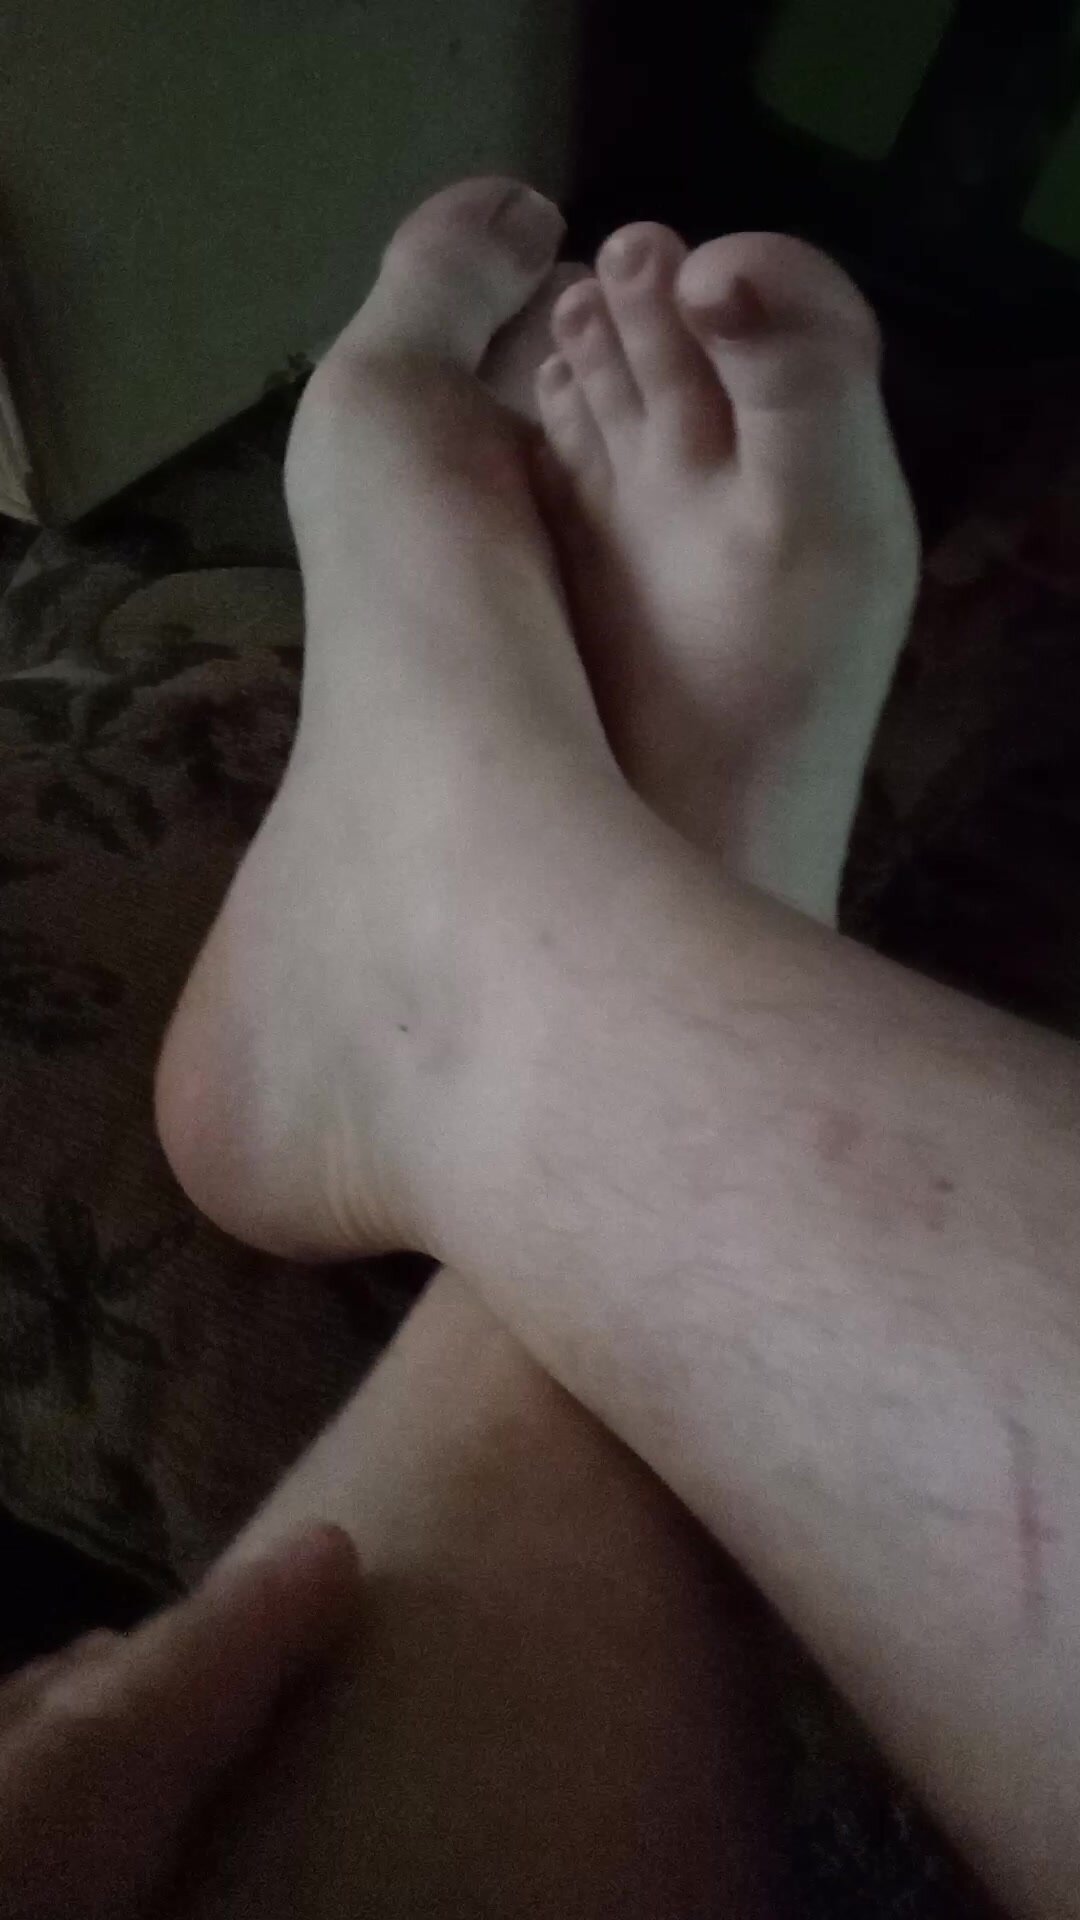 My Feet showing off.